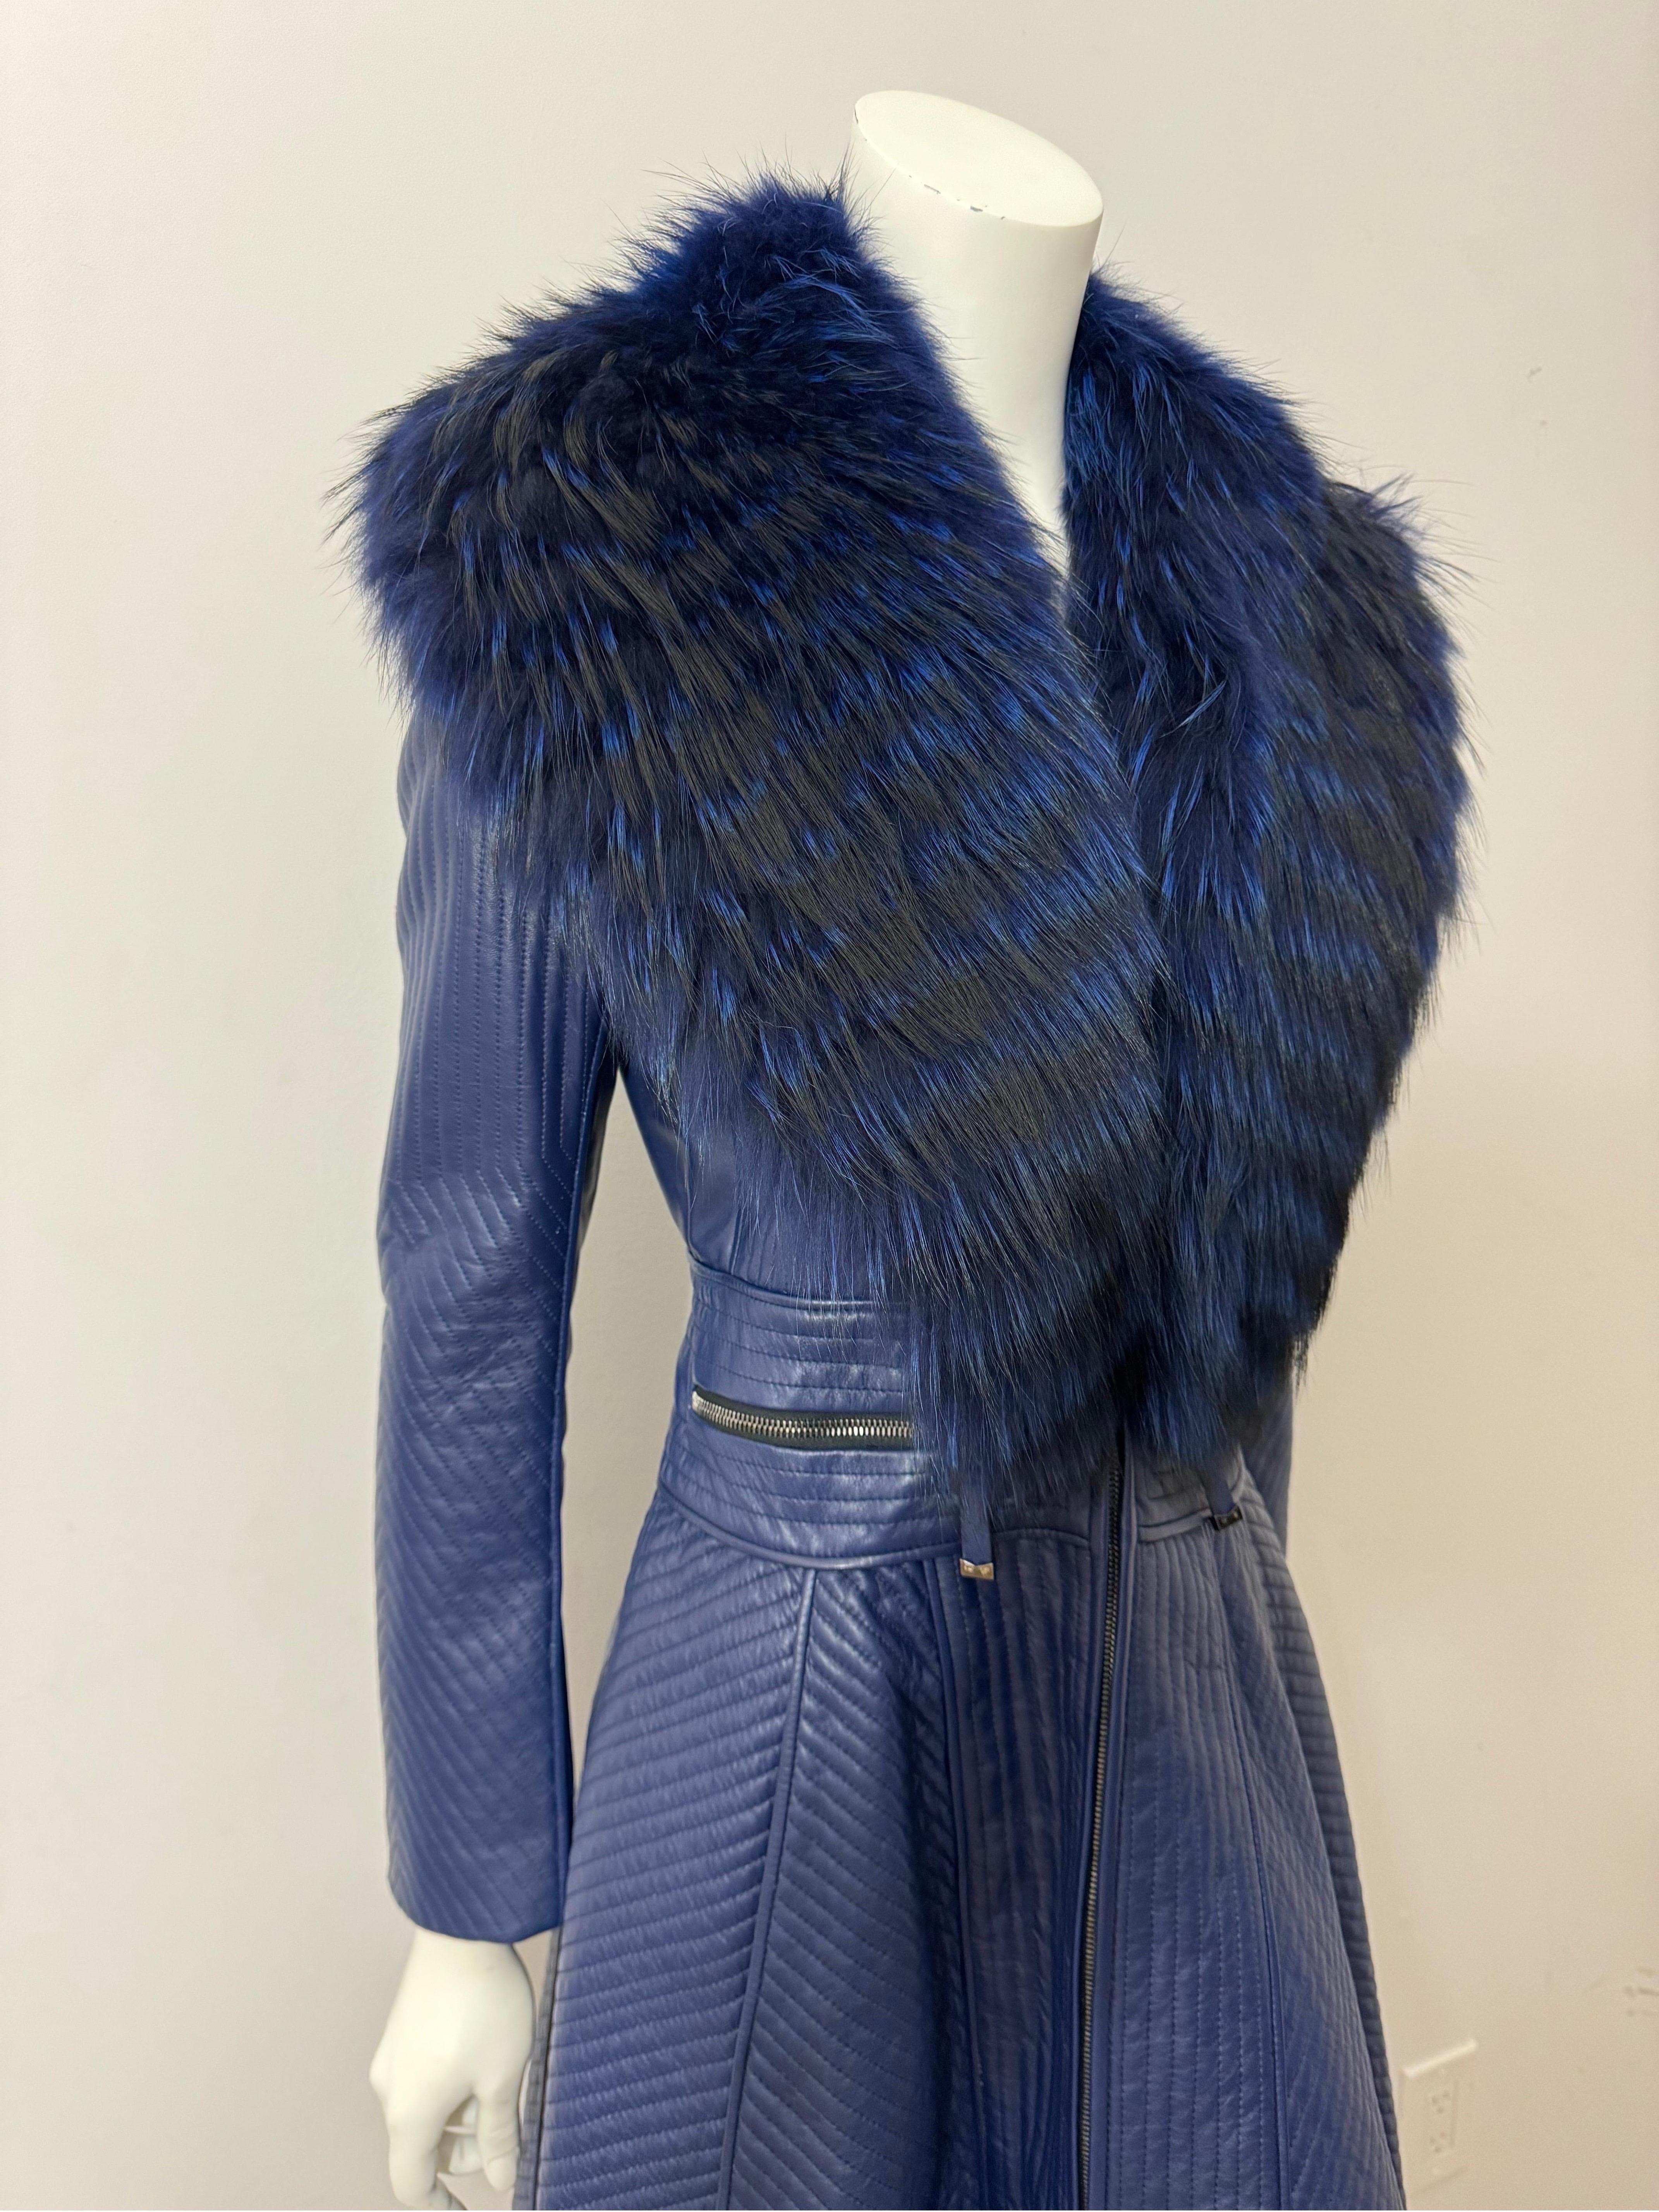 J Mendel Runway Pre Fall 2014 Fur Collar Blue Quilted Leather Coat Dress-Size 4 In Excellent Condition For Sale In West Palm Beach, FL